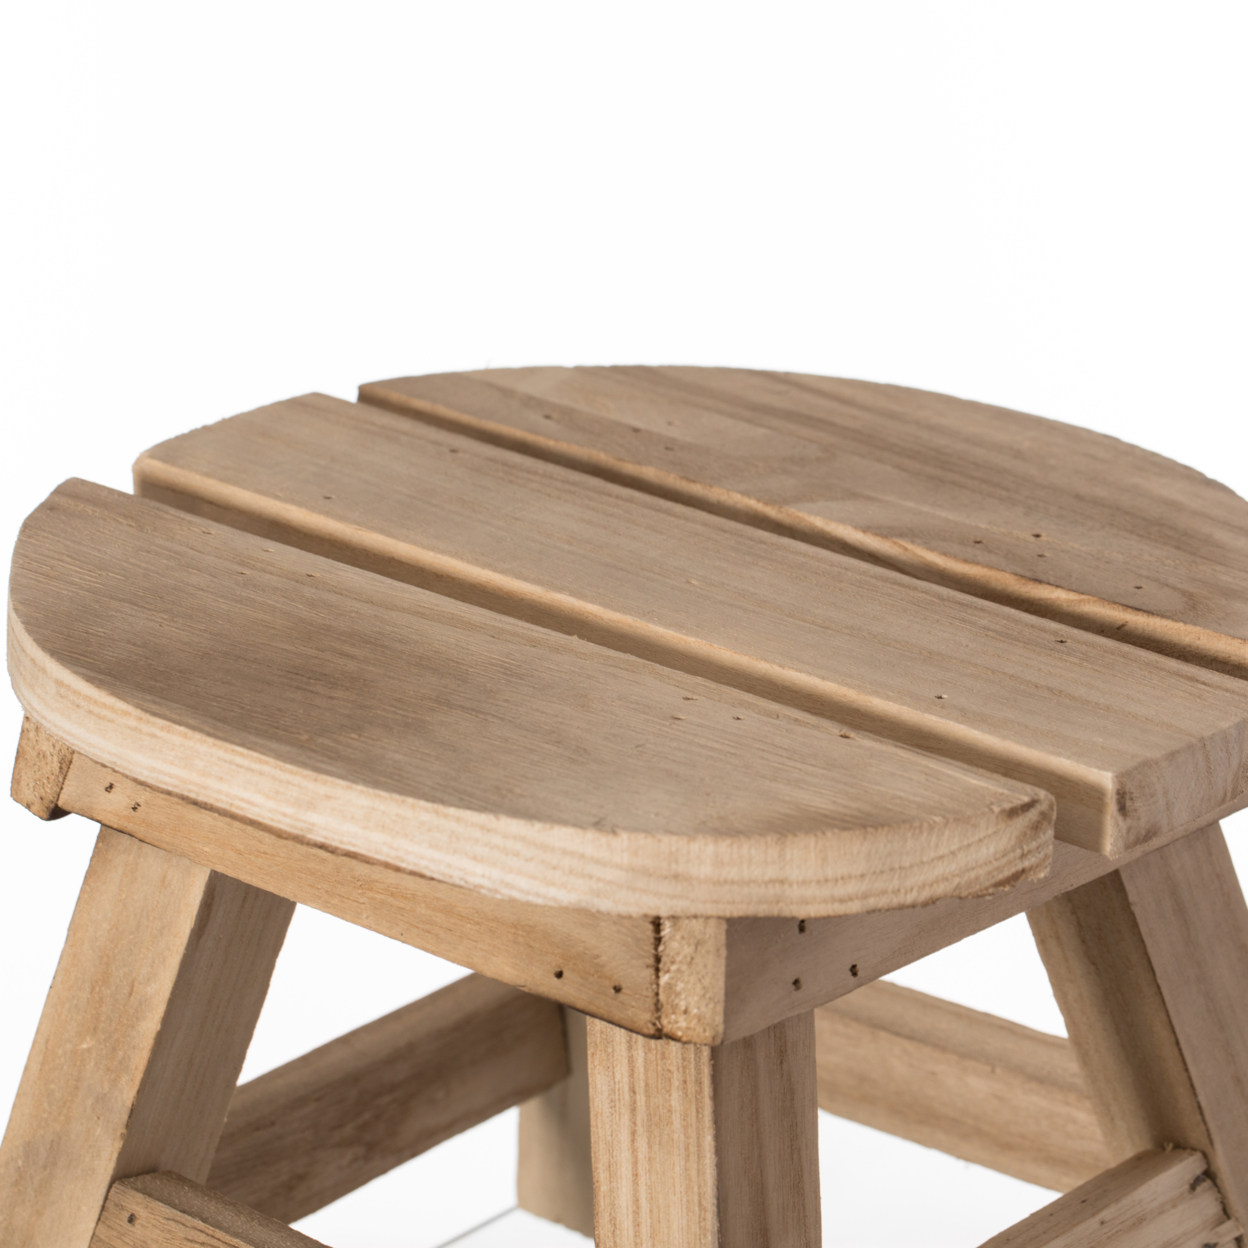 Decorative Antique Wood Style Natural Wooden Accent Stool For Indoor And Outdoor